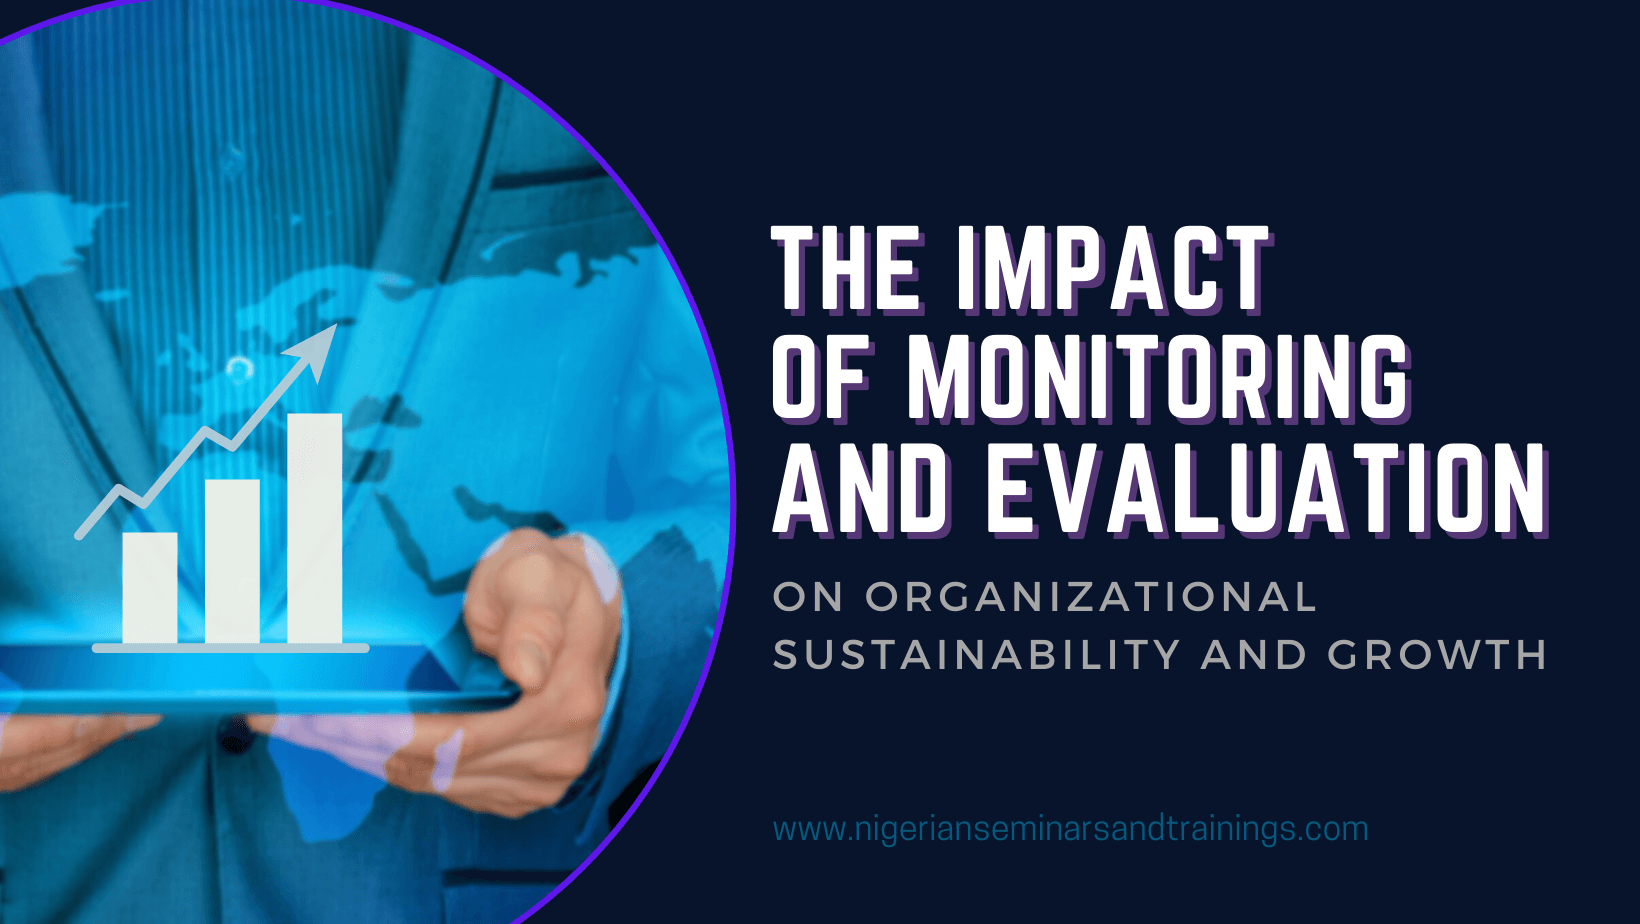 The Impact of Monitoring and Evaluation on Organizational Sustainability and Growth